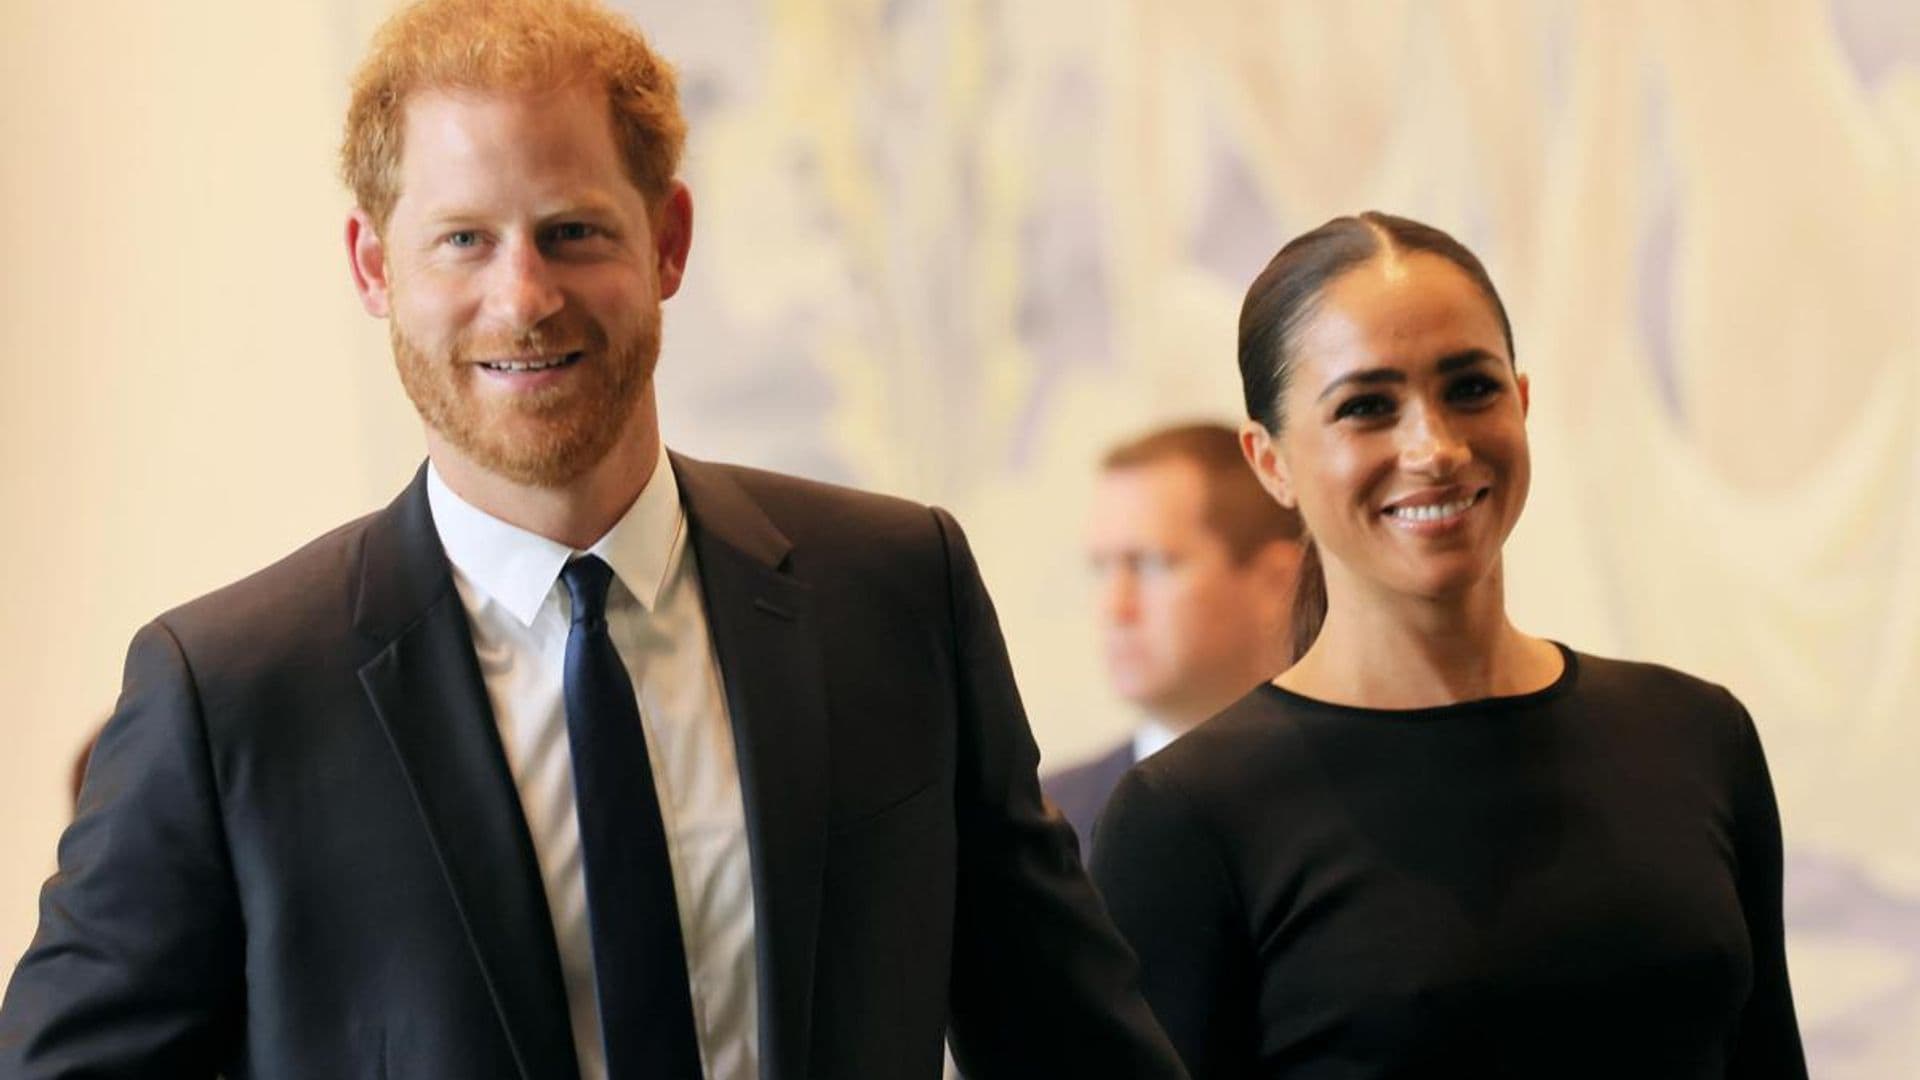 Prince Harry calls Meghan Markle his ‘soulmate’ in speech